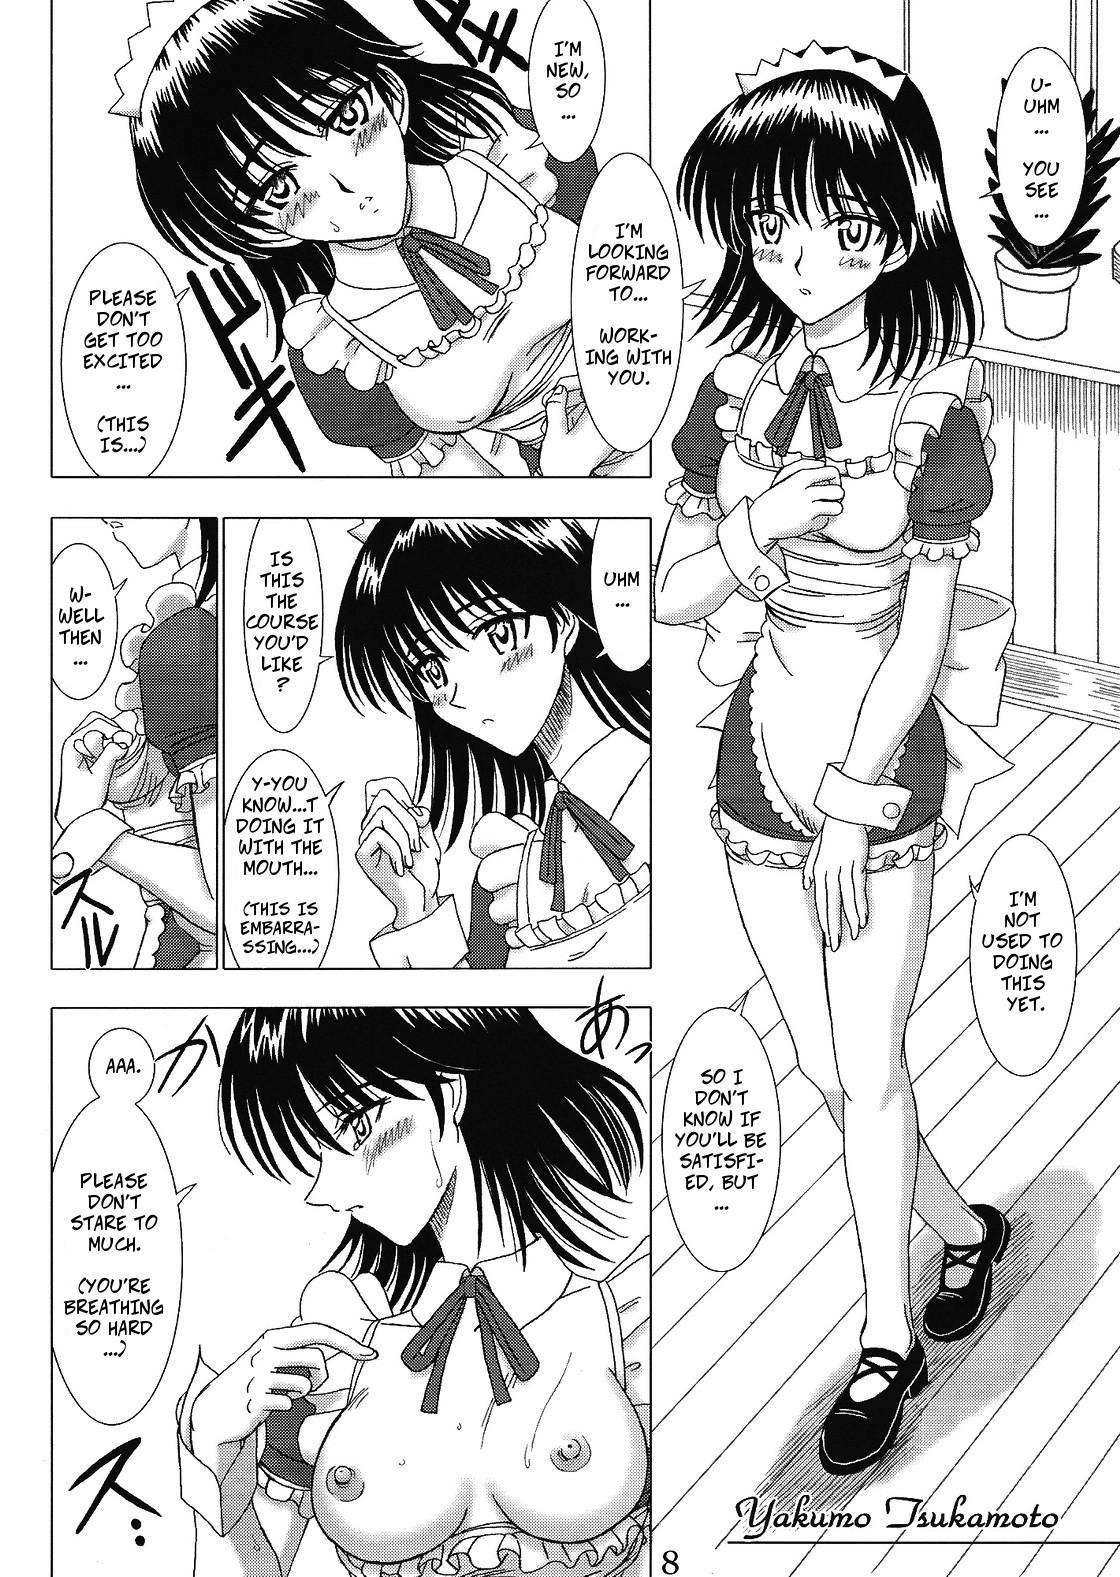 Stretch Cafe Tea Ceremony Club - School rumble Doctor Sex - Page 7